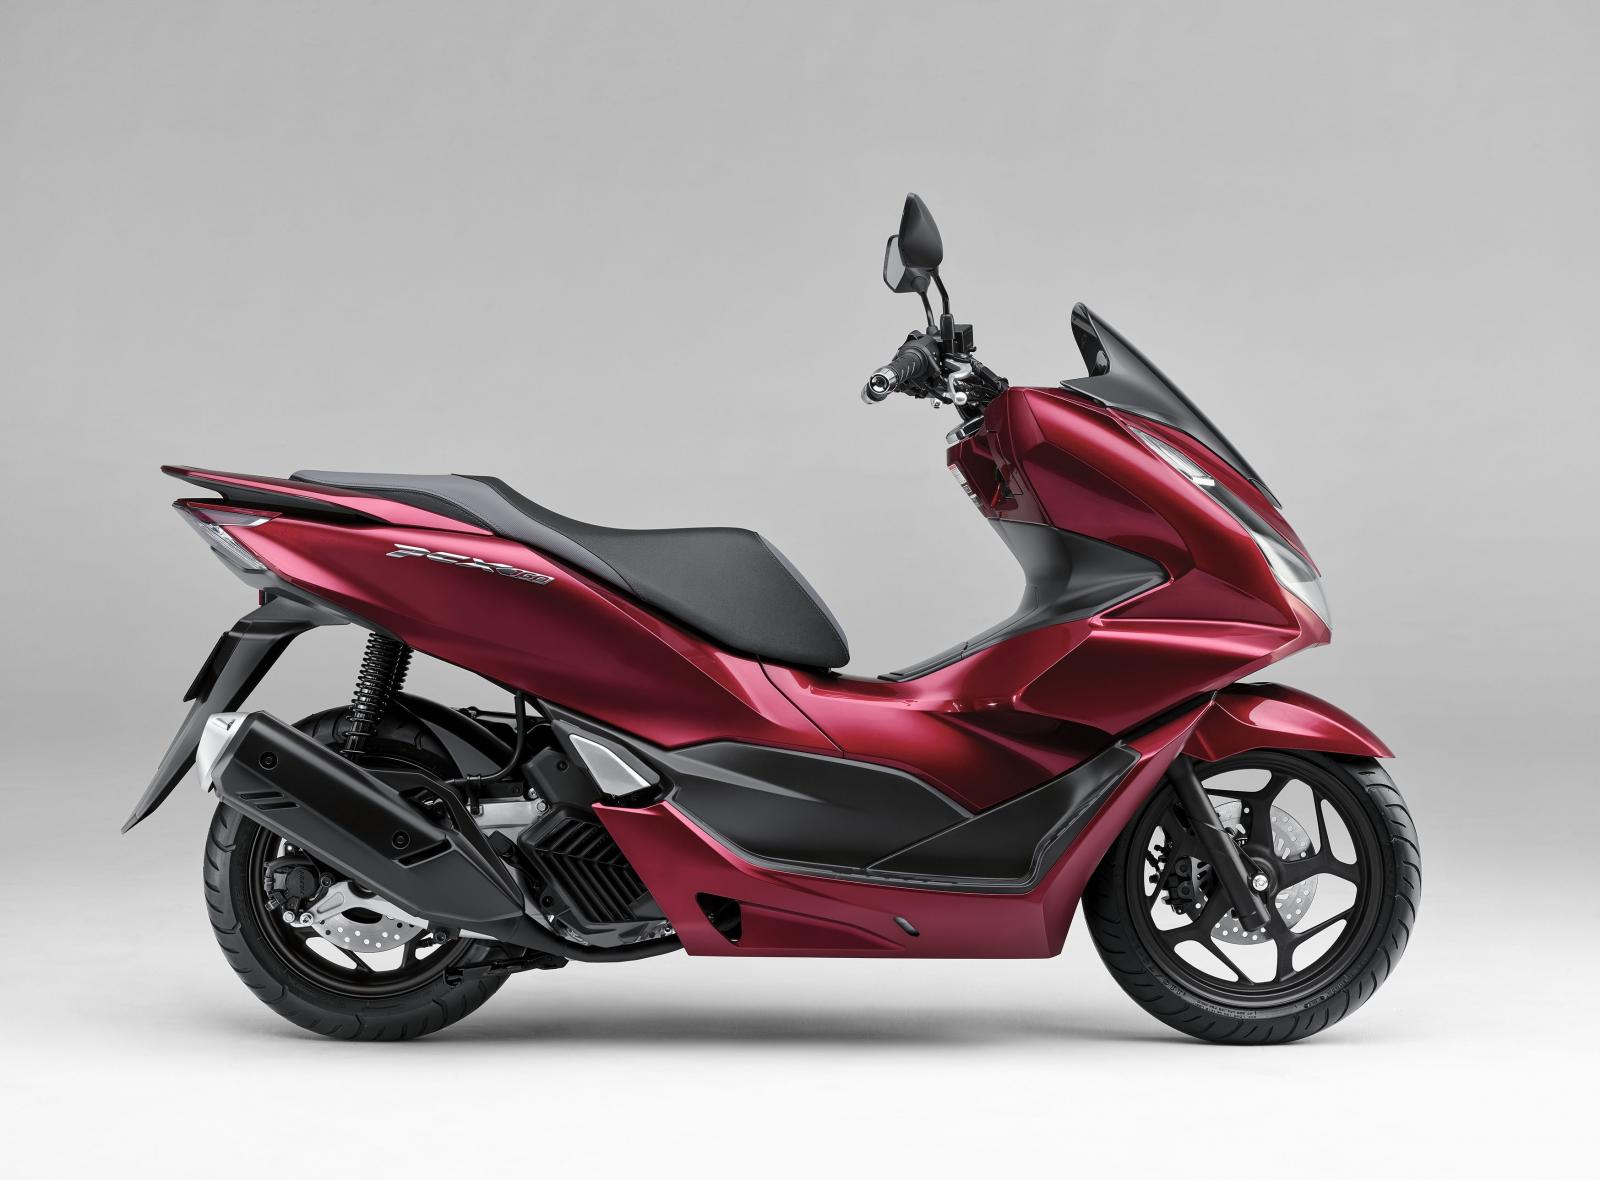 New Honda PCX range of scooters (including a hybrid) introduced in Japan